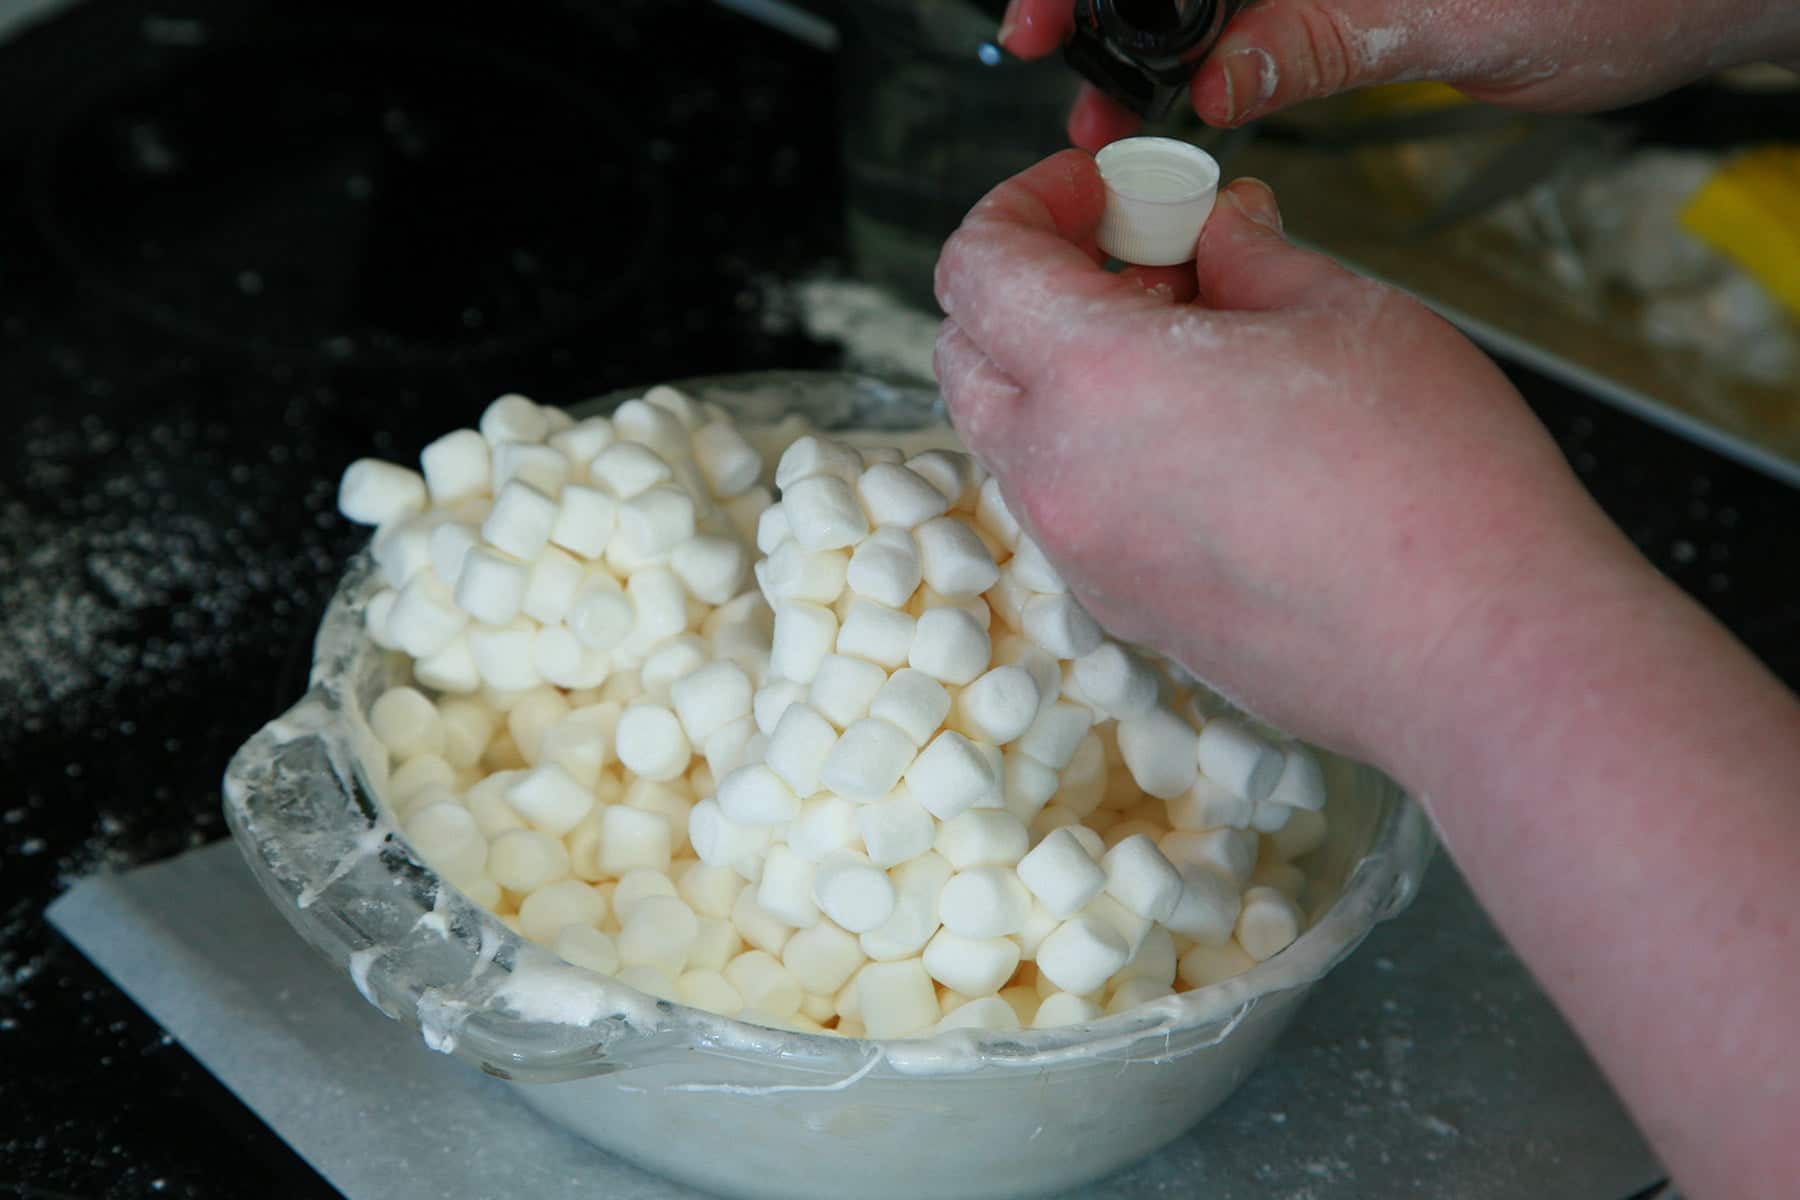 A glass bowl filled with mini marshmallows. A hand holds a cap of peppermint extract, about to add it to the mix.